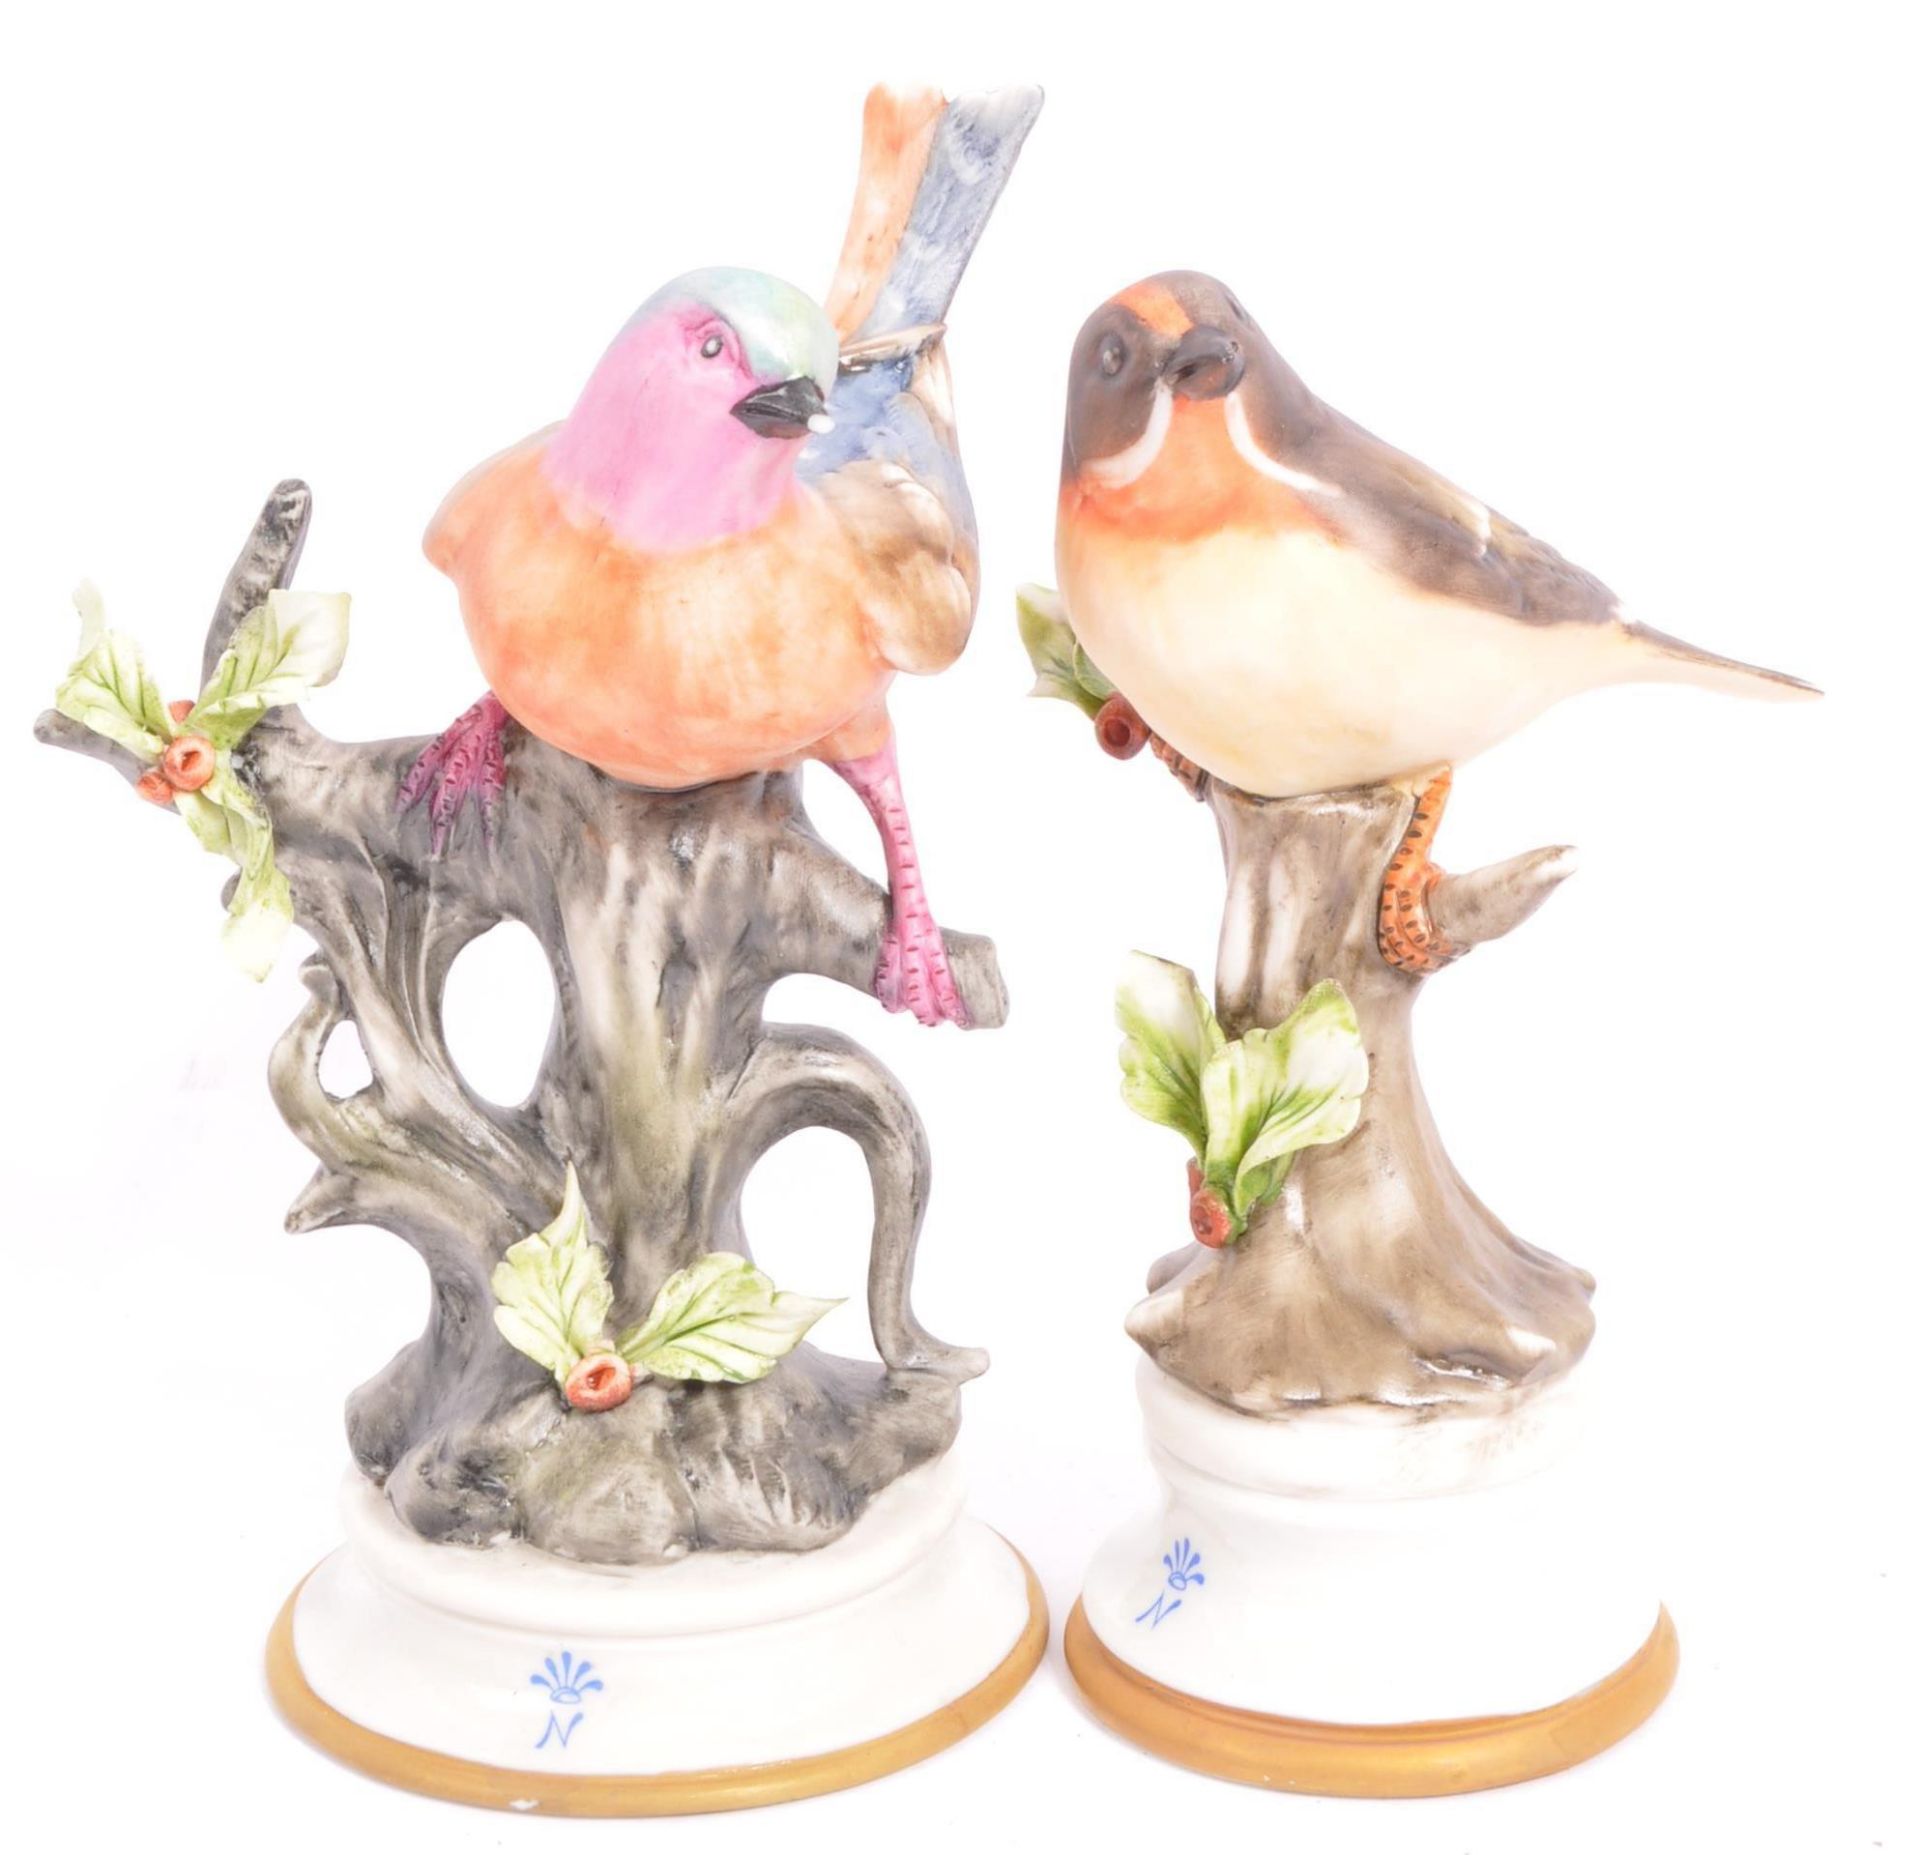 COLLECTION OF ITALIAN PORCELAIN CAPODIMONTE FIGURINES - Image 4 of 5